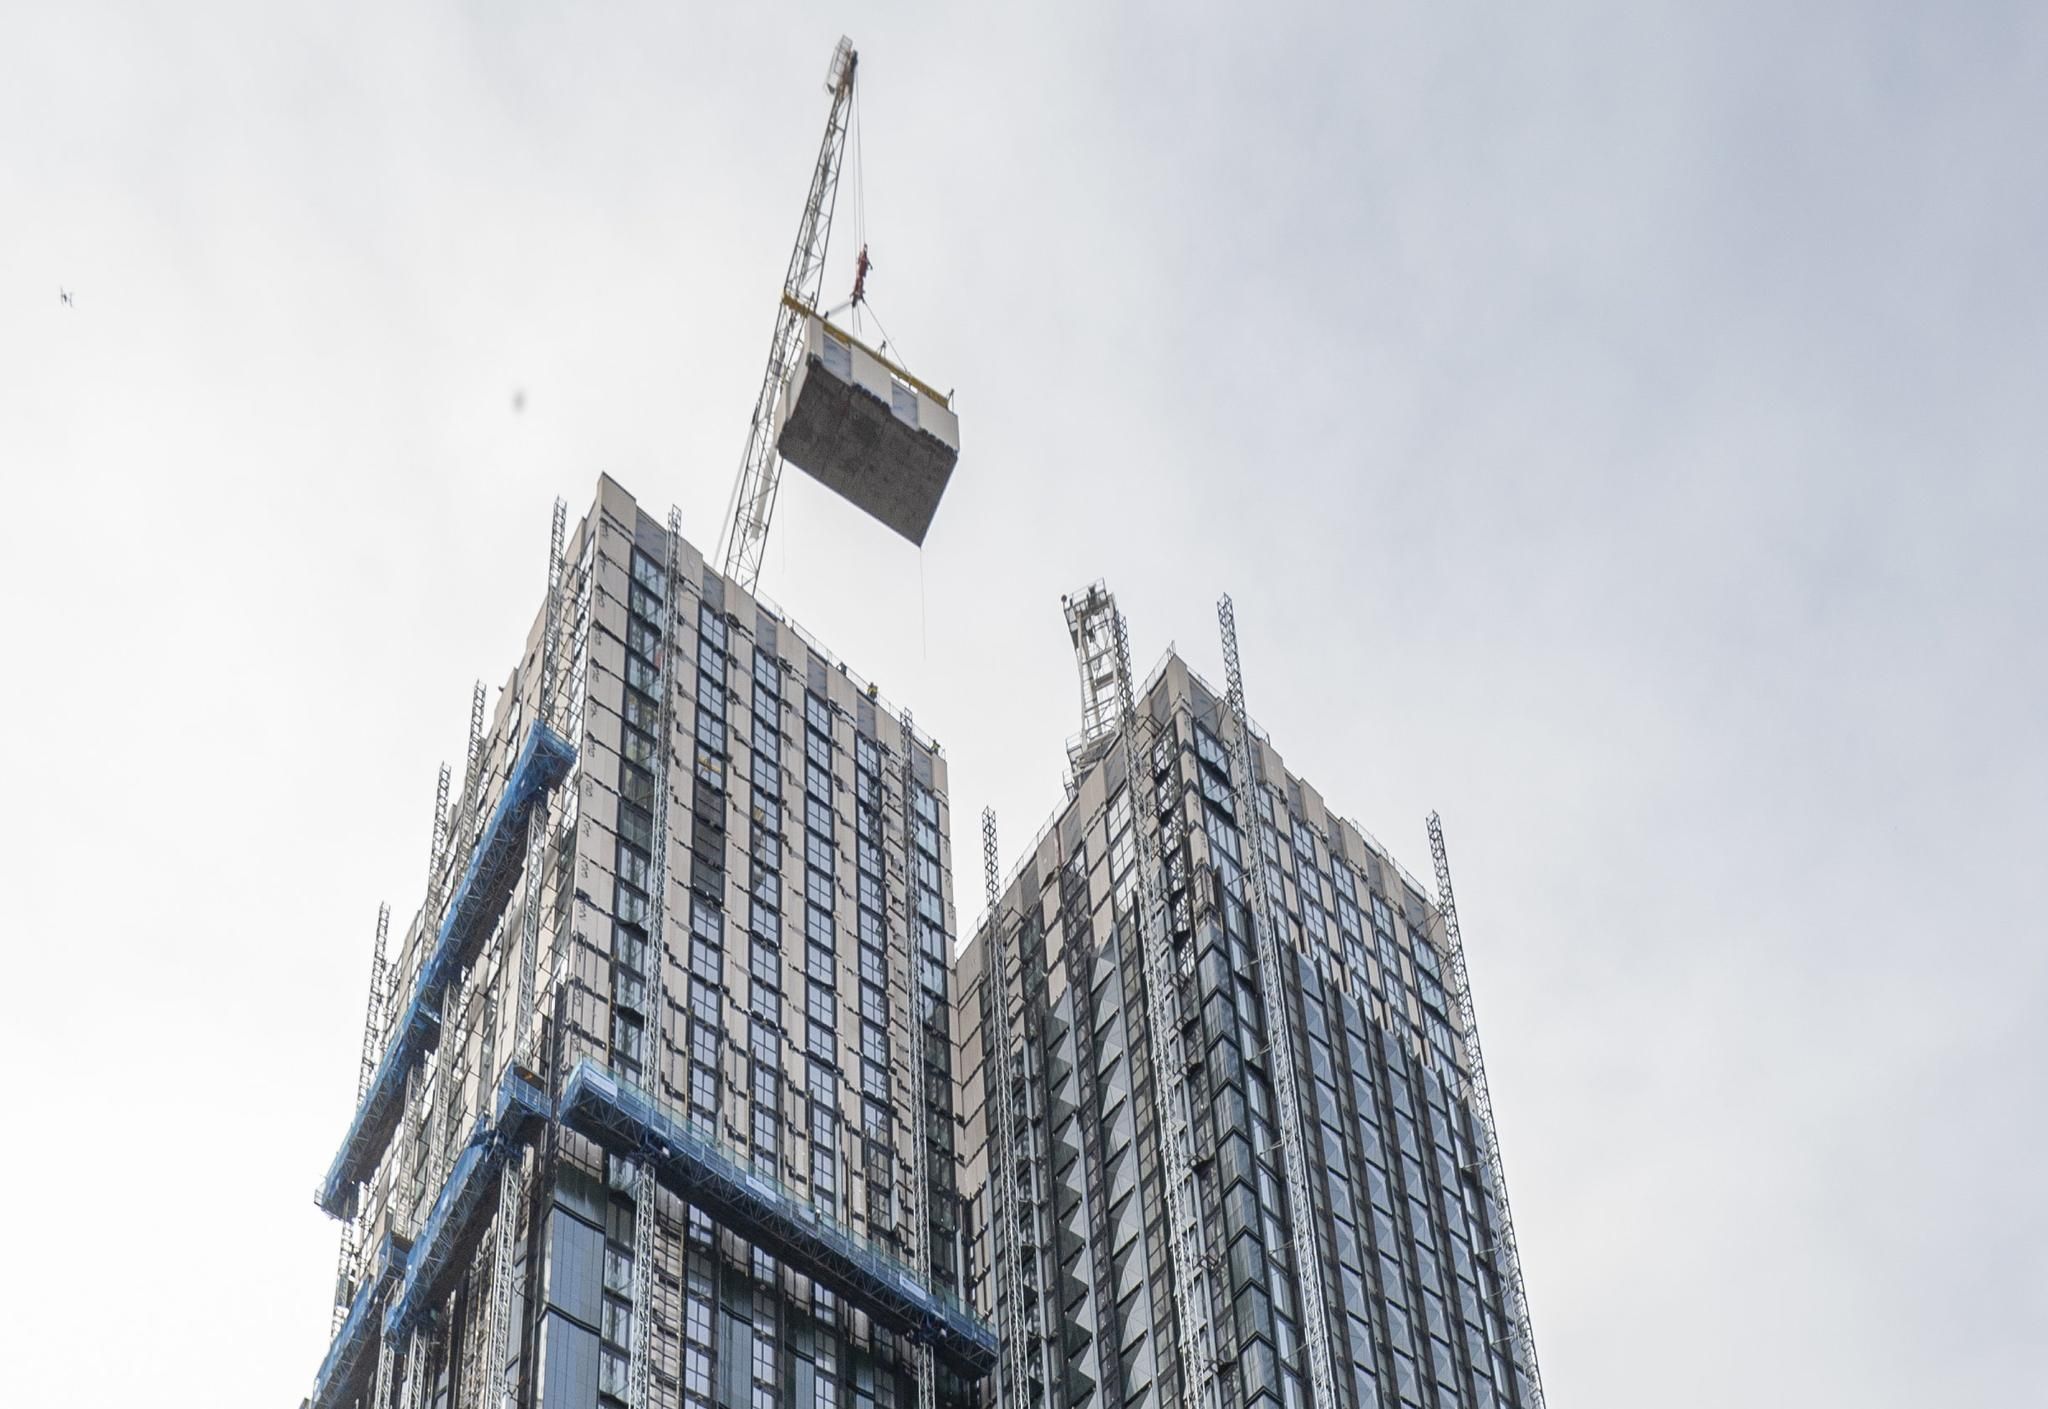 Final module arrives to complete world's tallest modular residential building in South London